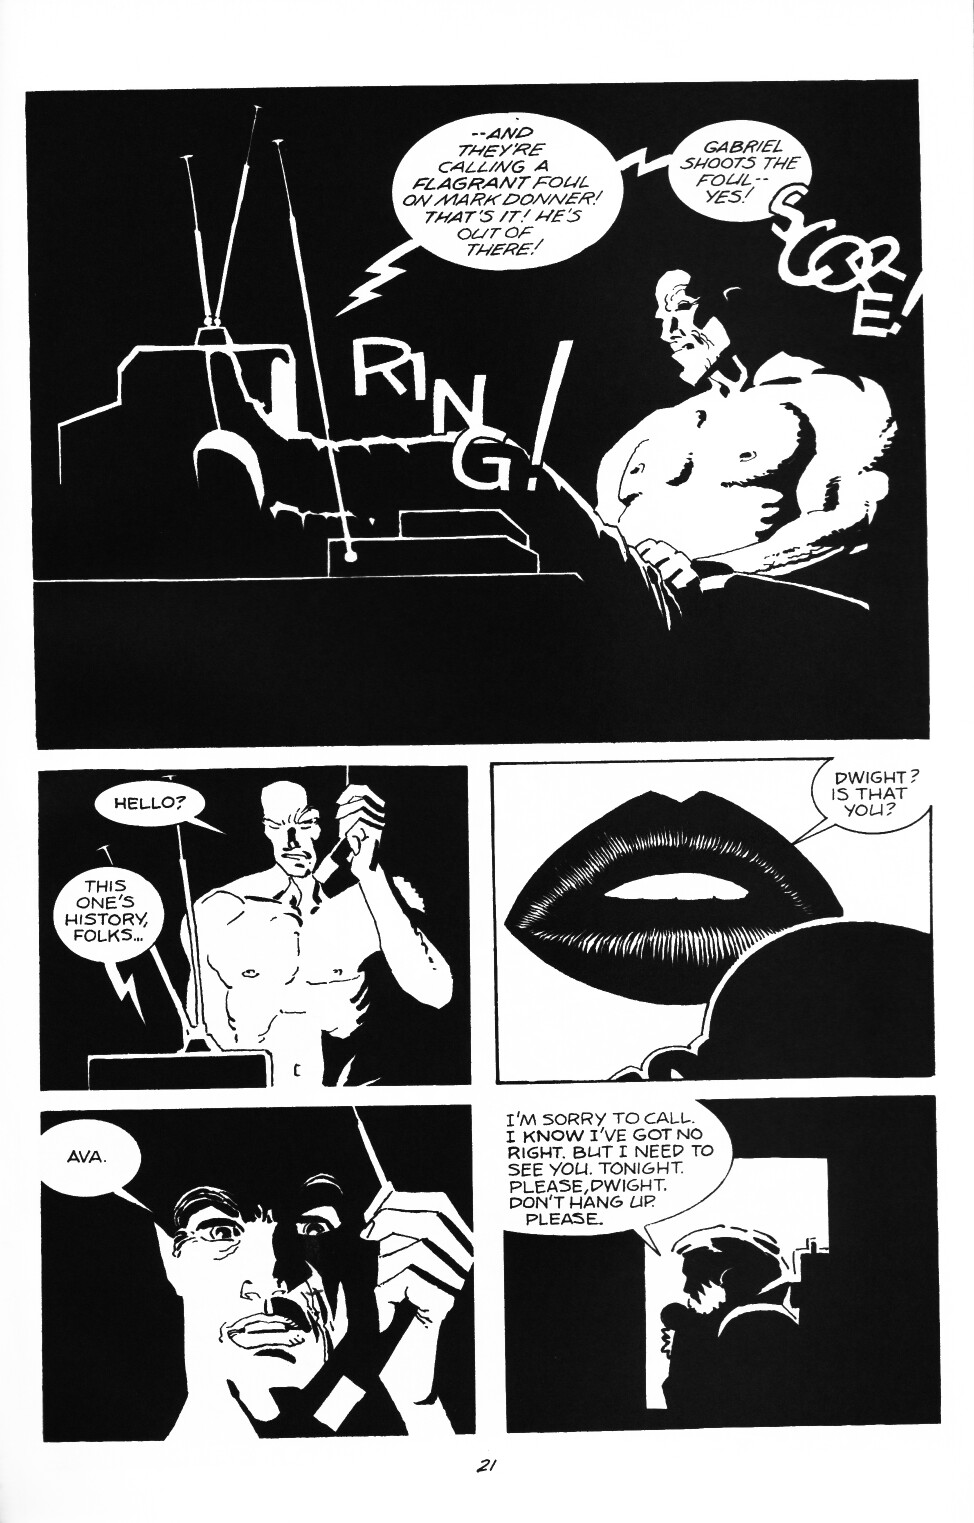 Sin City: A Dame To Kill For Episode 1-B